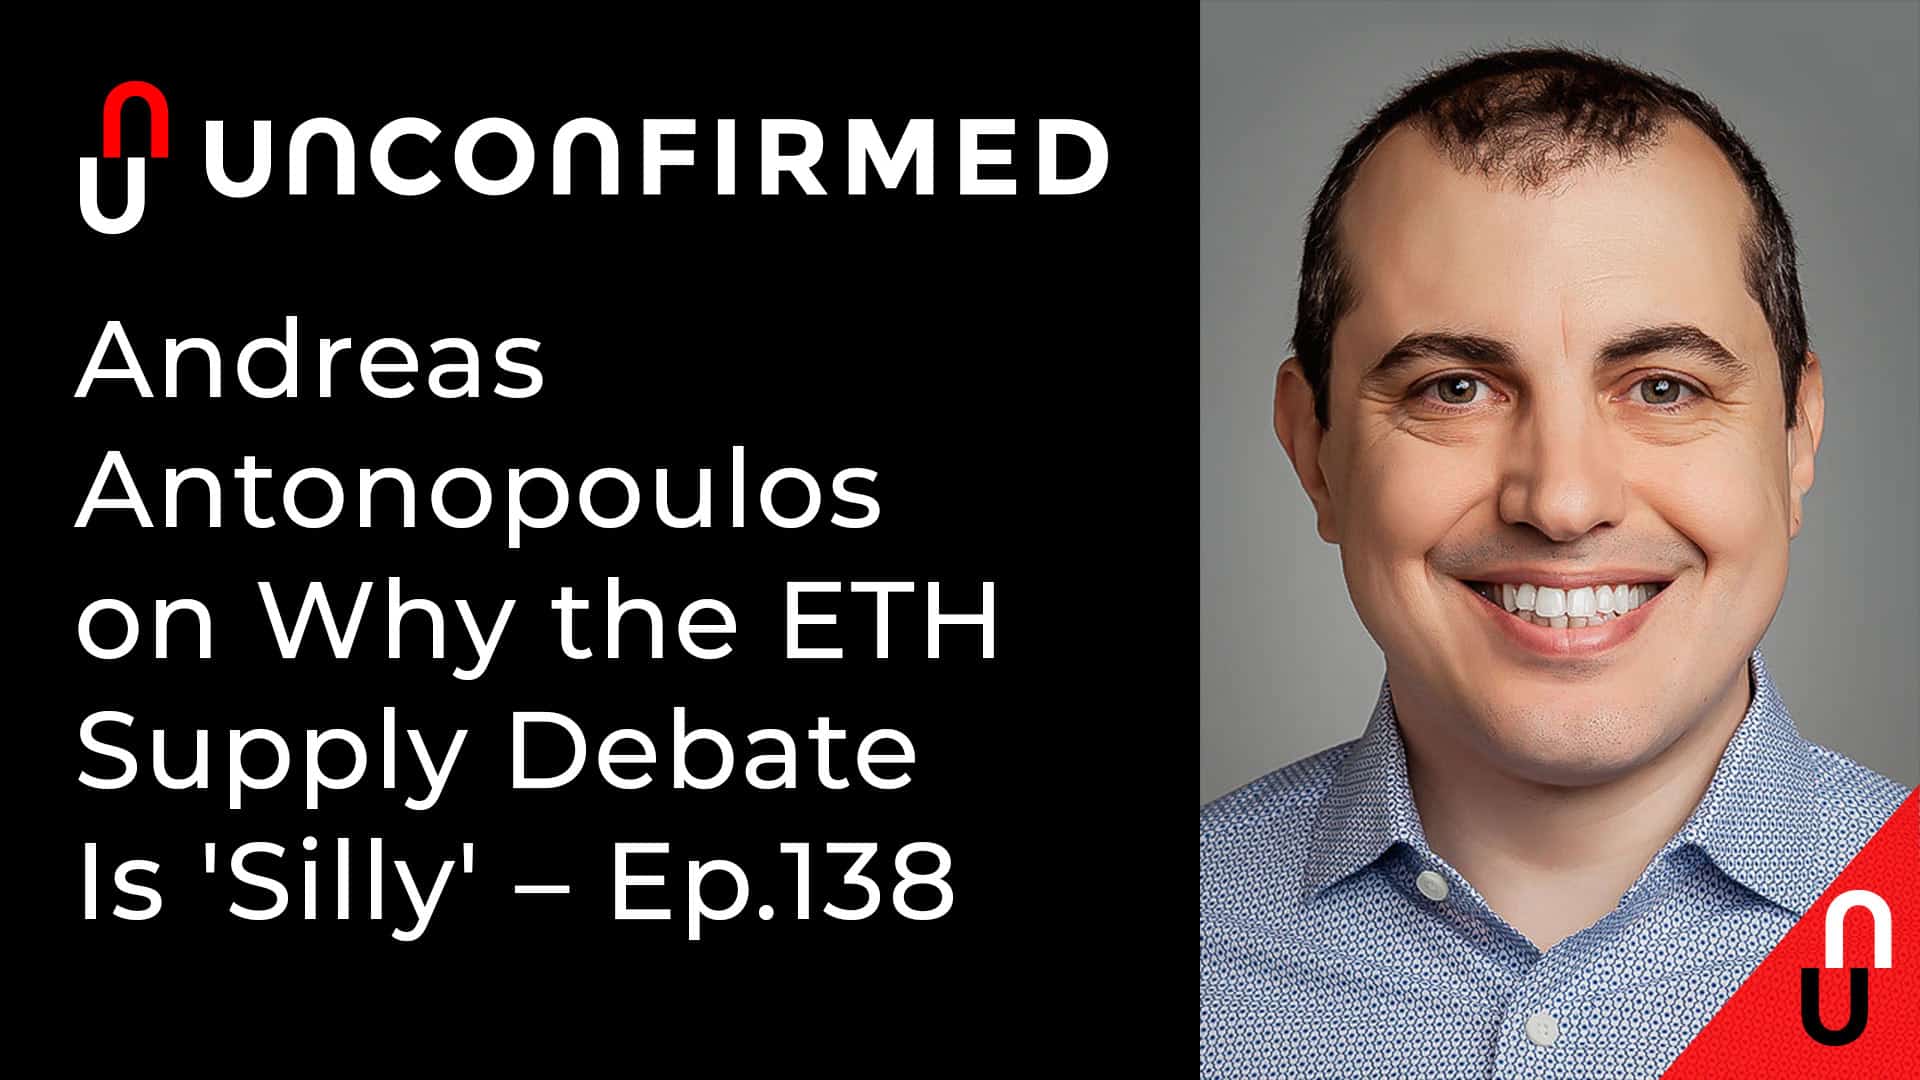 Unconfirmed - Ep.138 - Andreas Antonpoulos on Why the ETH Supply Debate Is 'Silly'